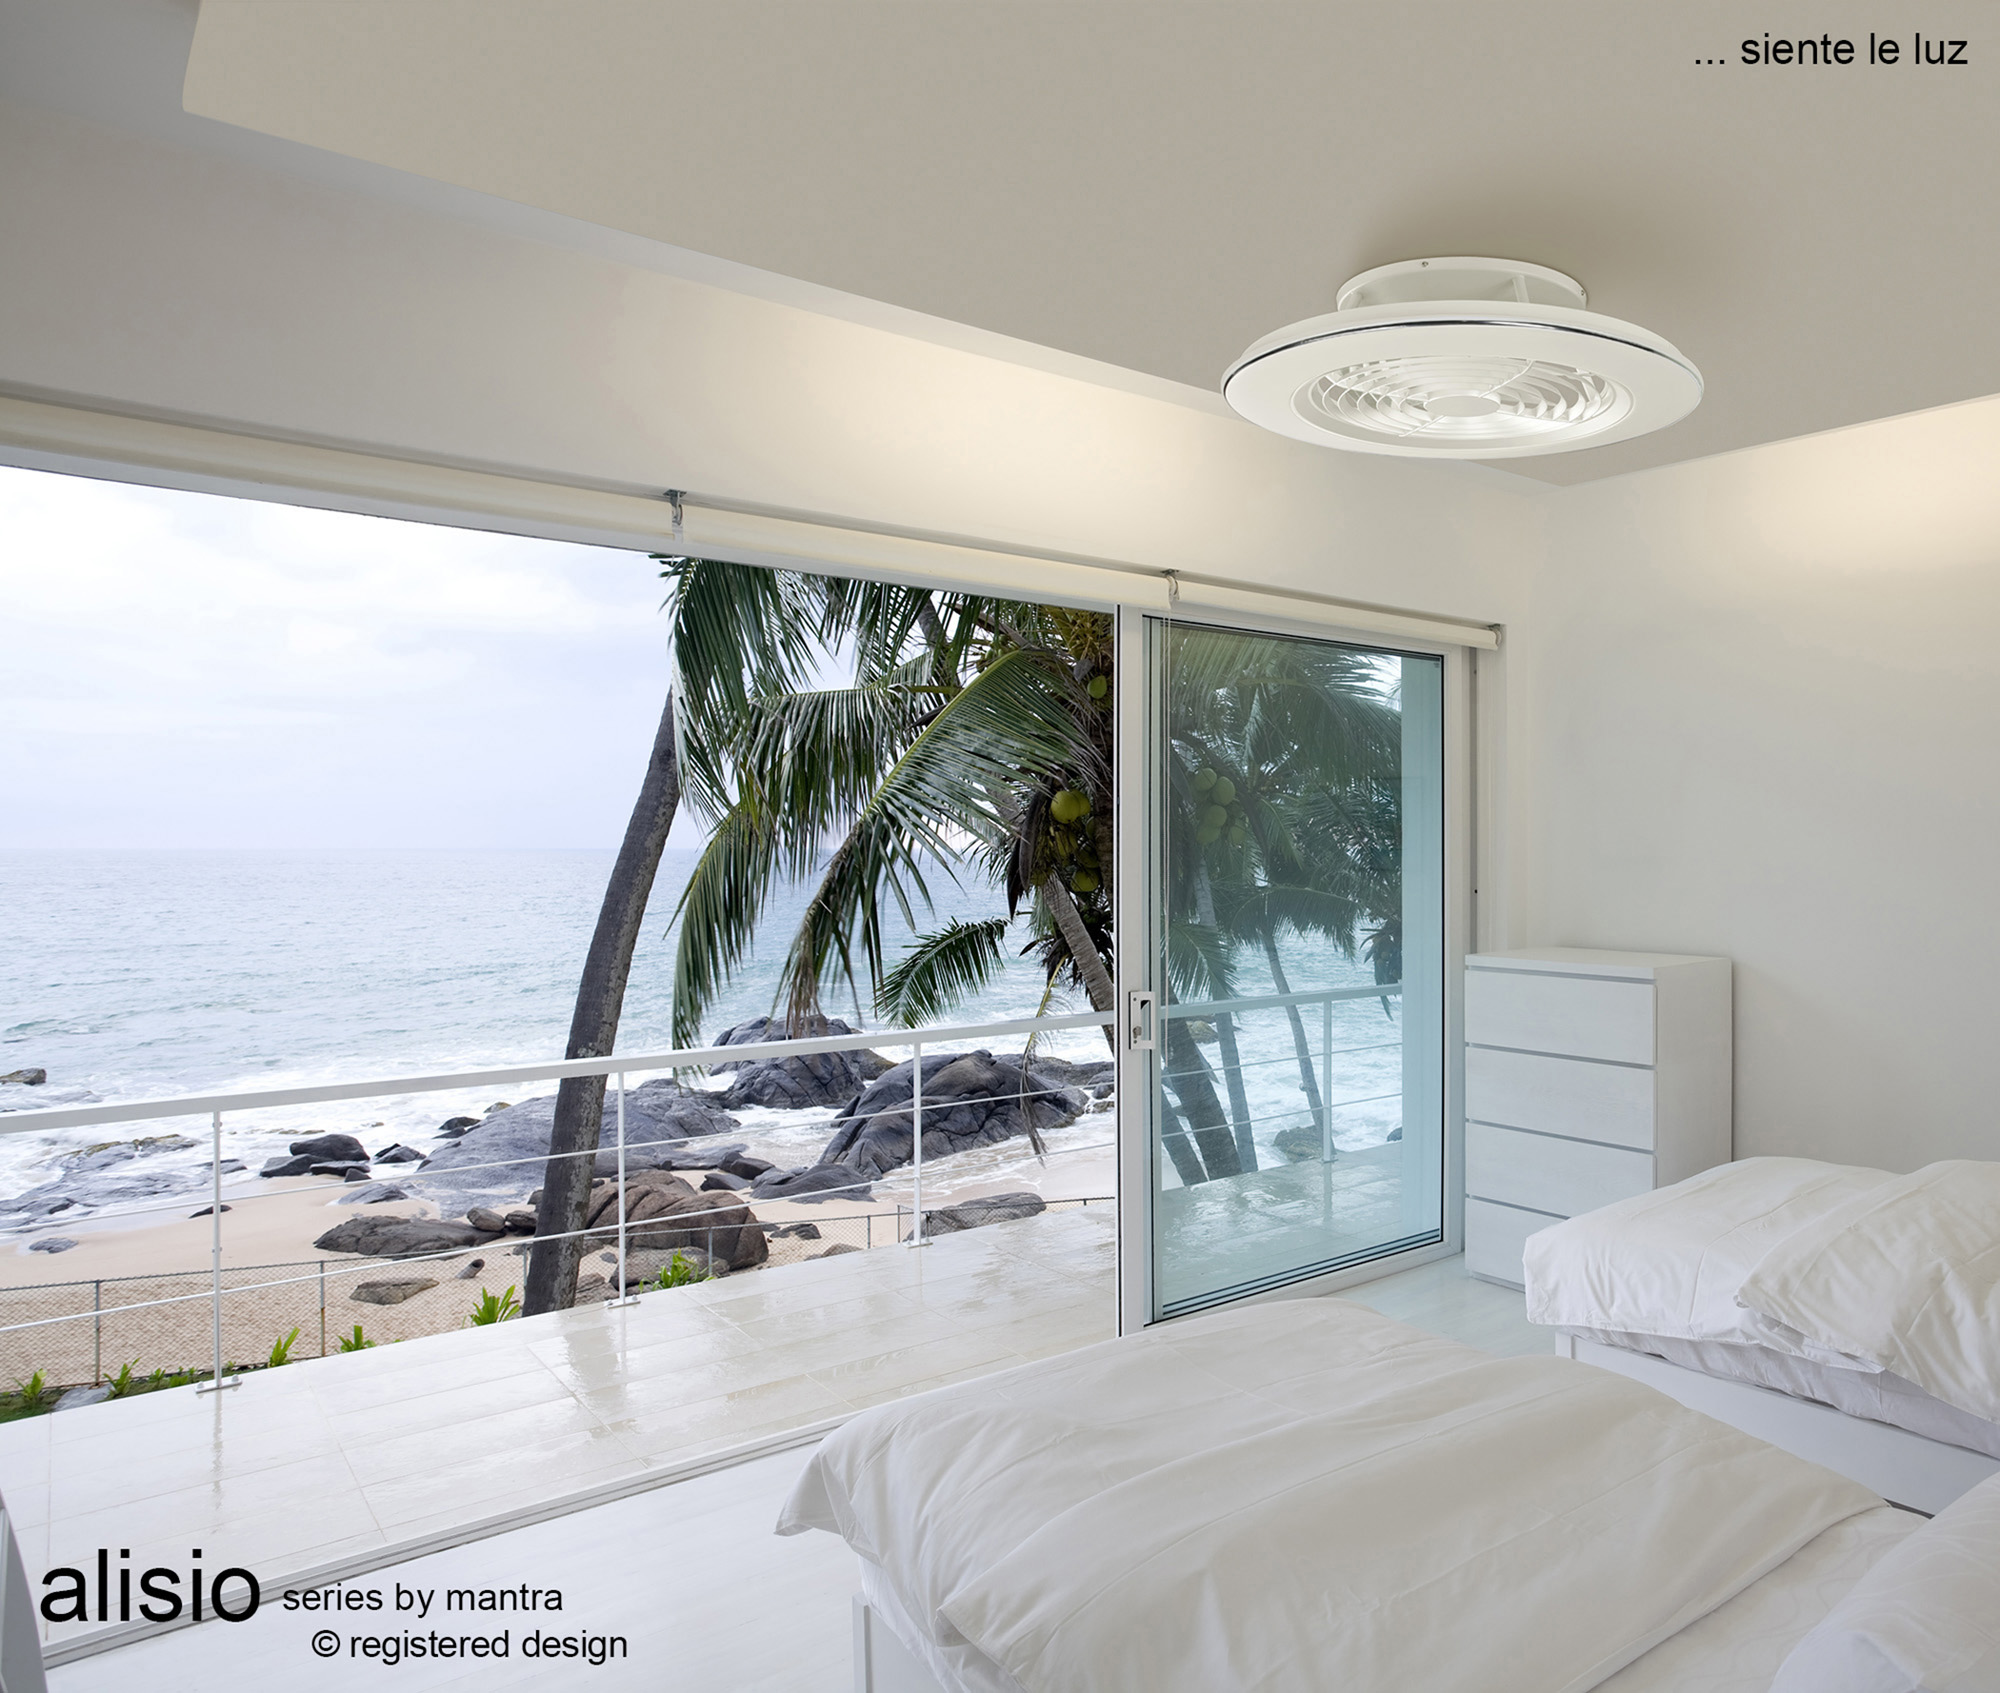 Alisio Heating, Cooling & Ventilation Mantra Desk/Ceiling Fans & Portable Air Conditioners